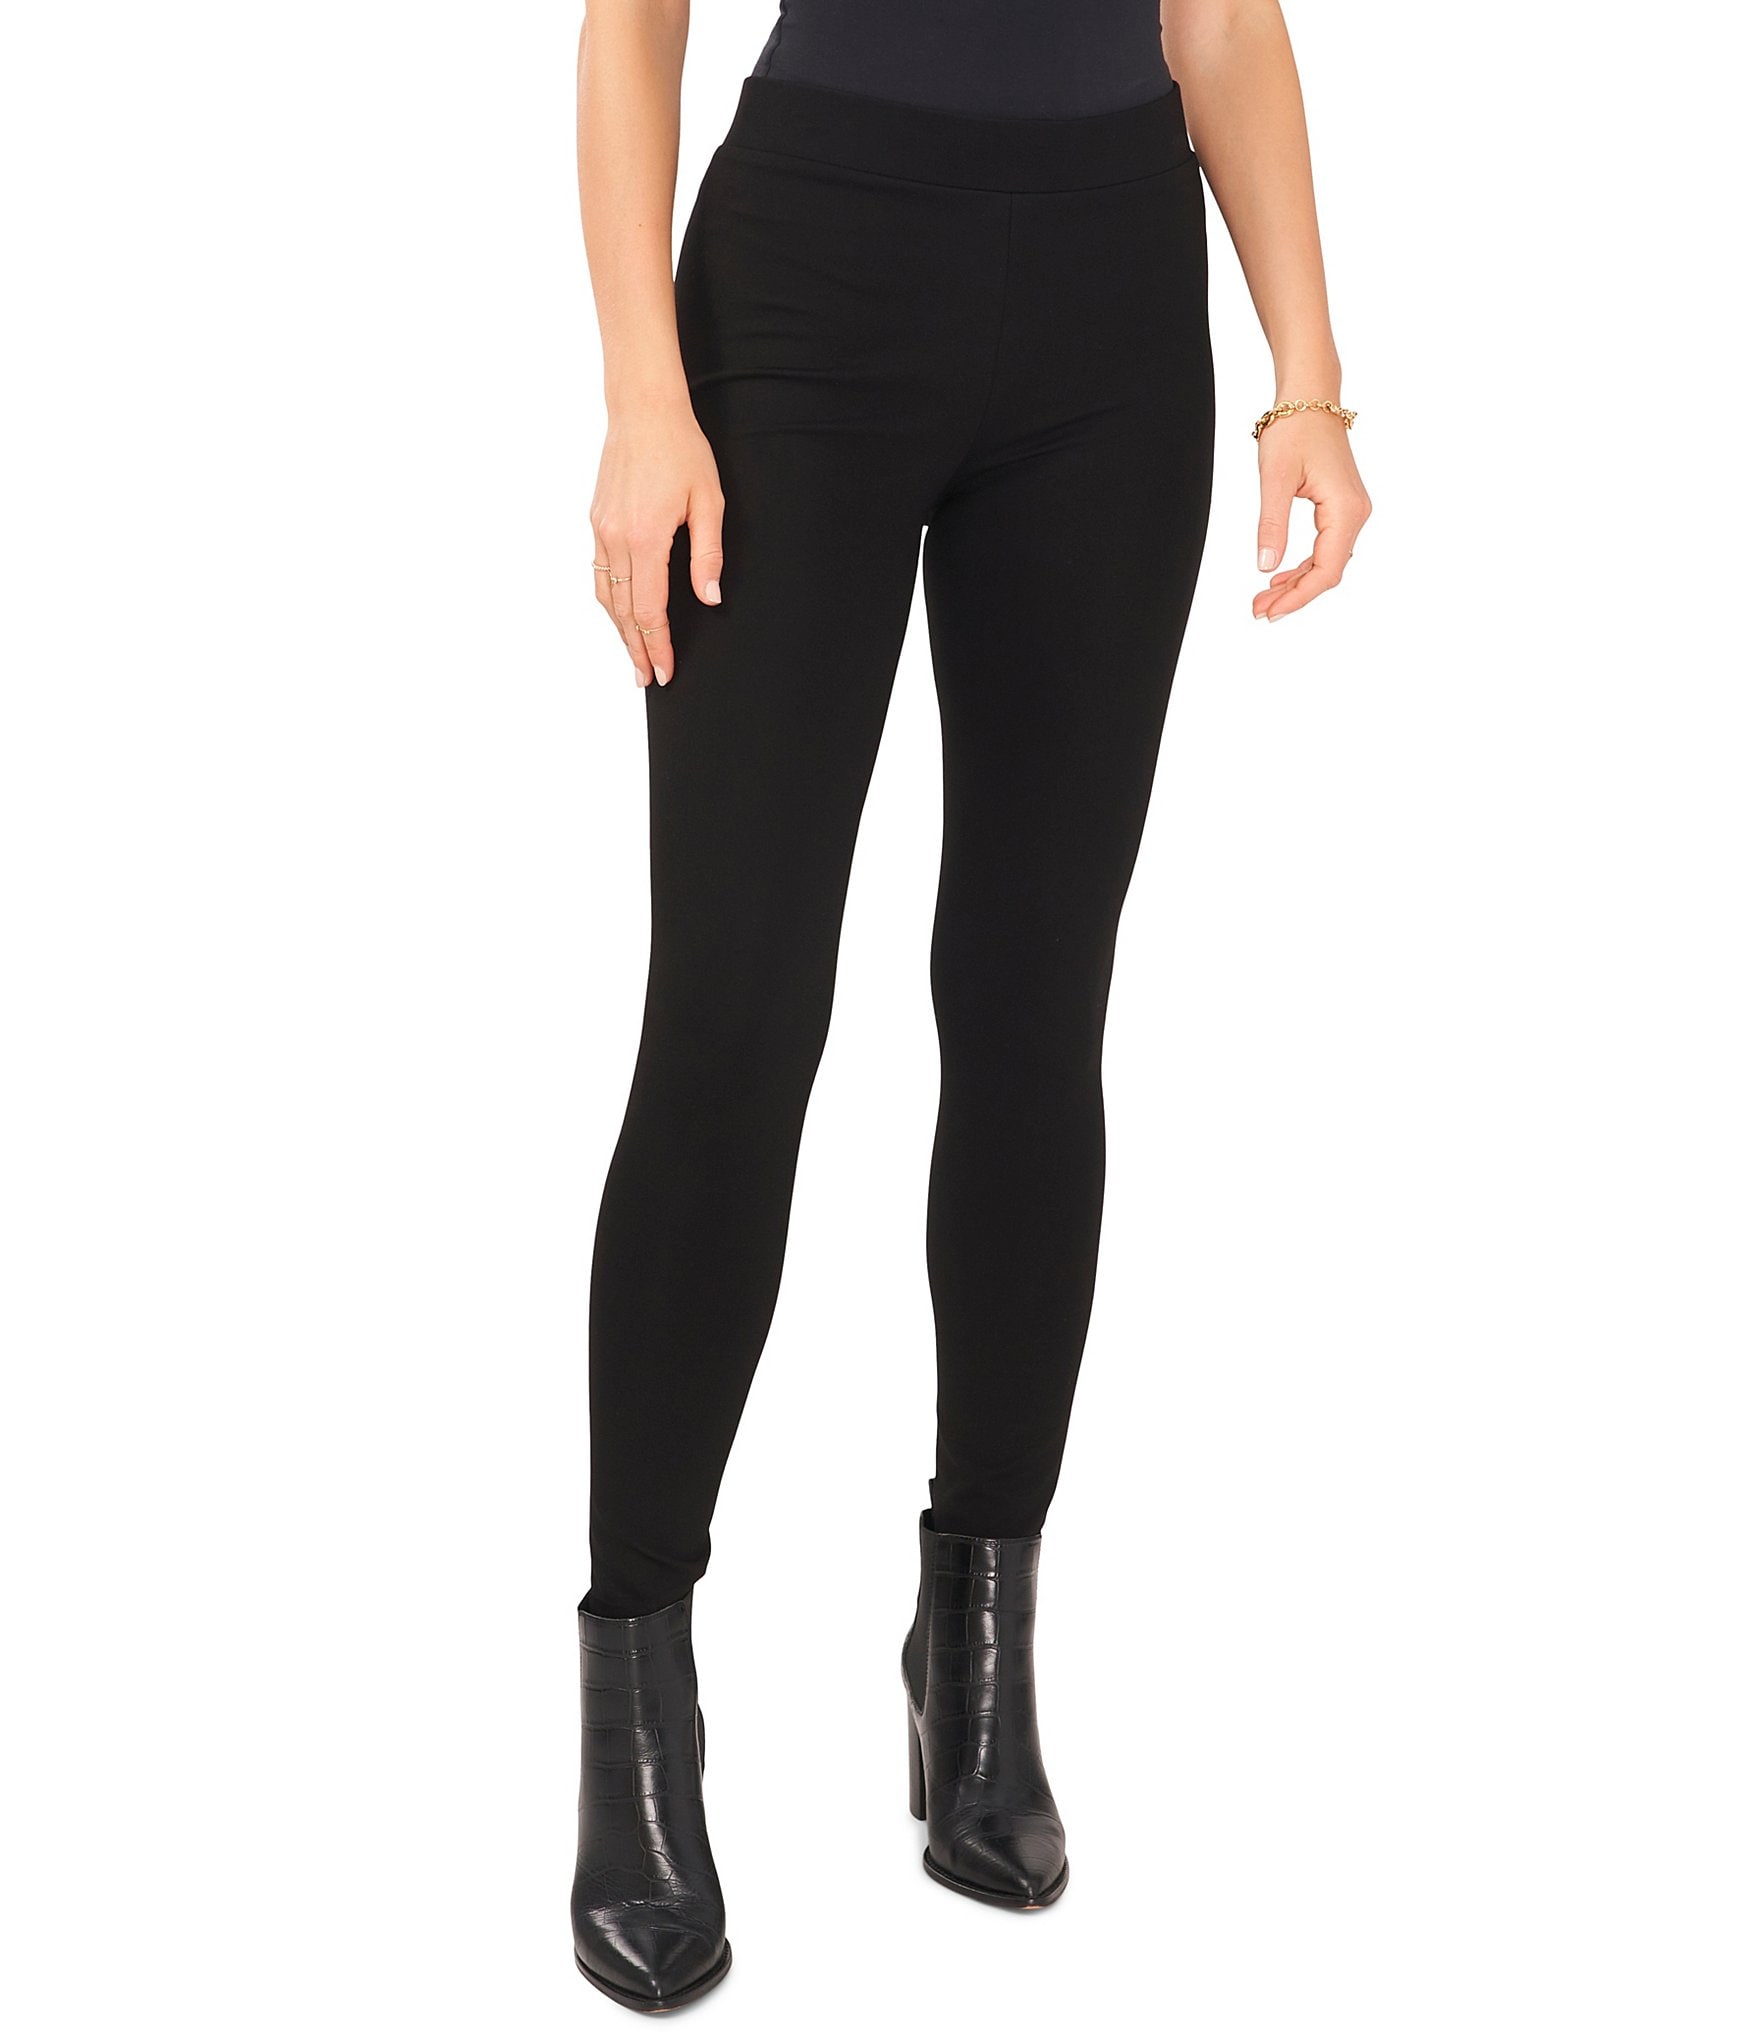 Vince Camuto Ponte Leggings, Black, X-Small - Discount Scrubs and